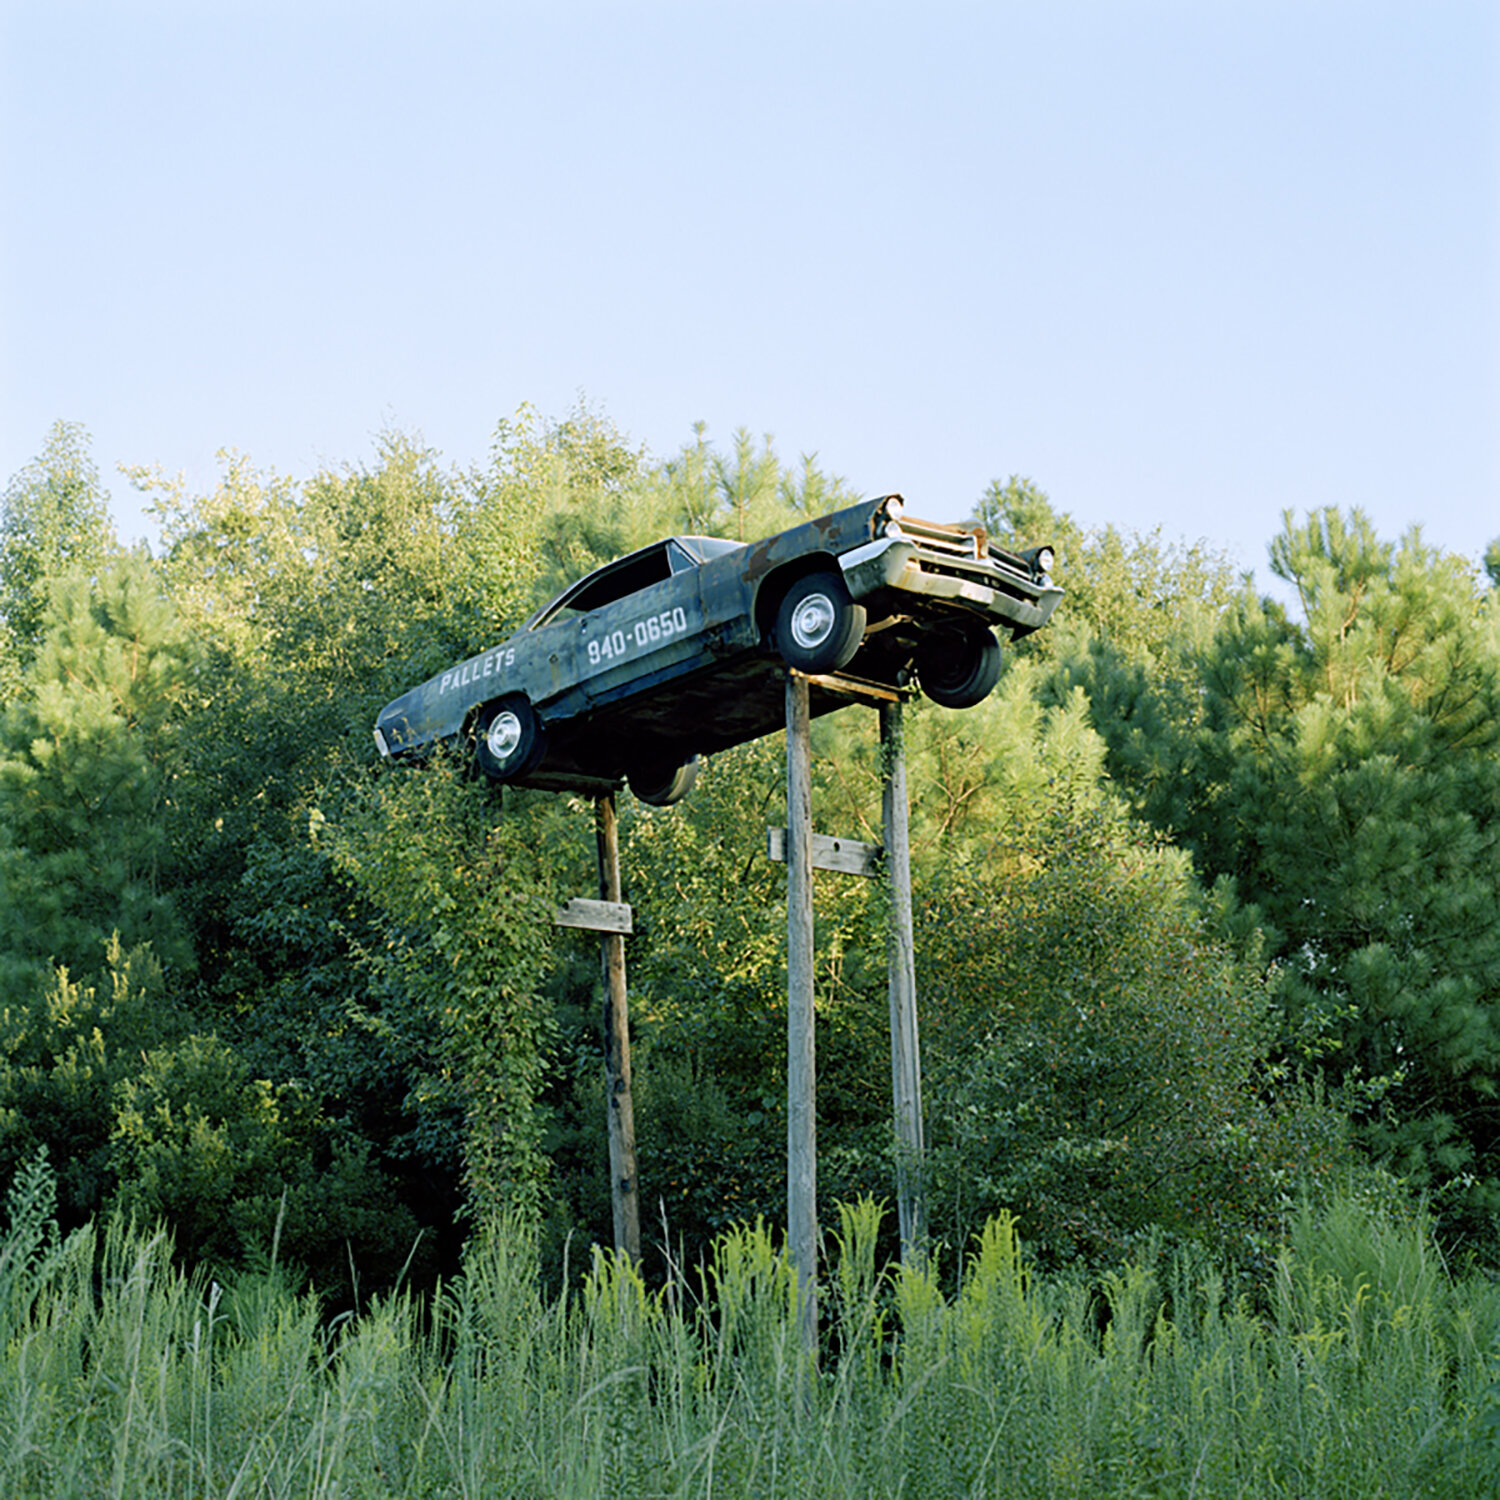   Car on Stilts , 2009 Edition: 8/17 Carbon pigment print 15 × 15 in. (image size) The Do Good Fund, Inc., 2020-032 